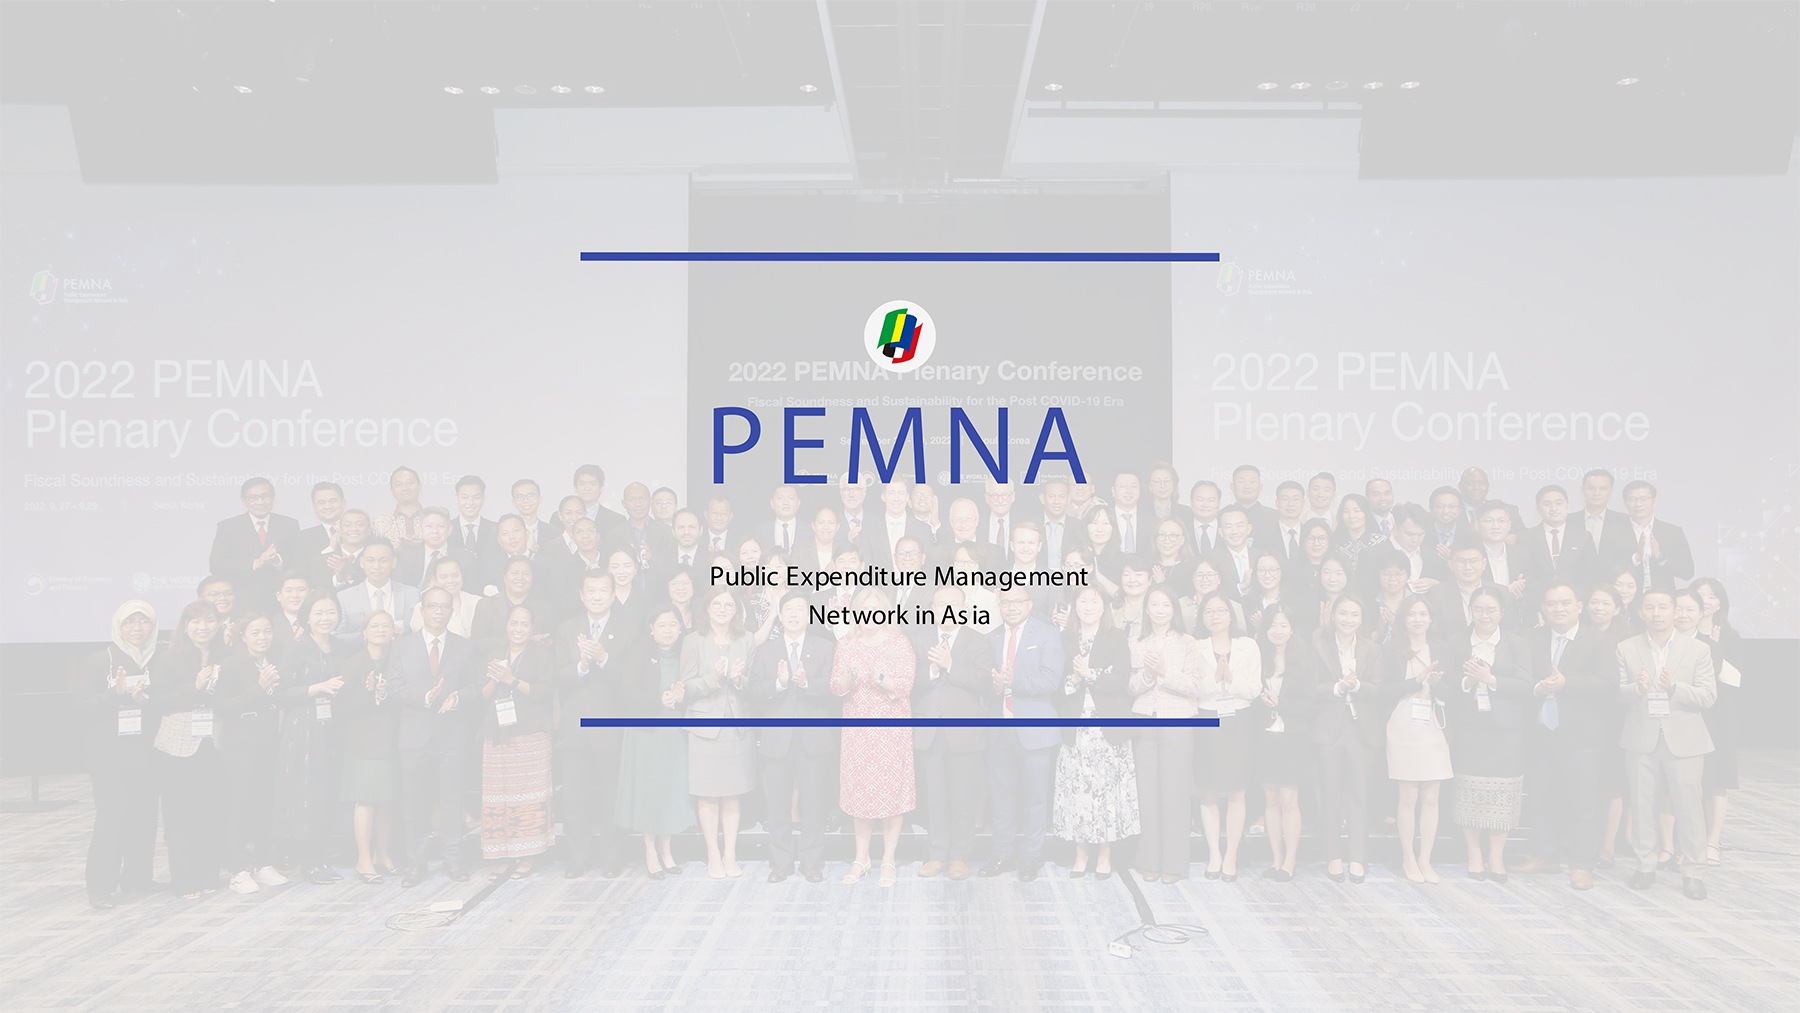 Public Expenditure Management Network in Asia (PEMNA)